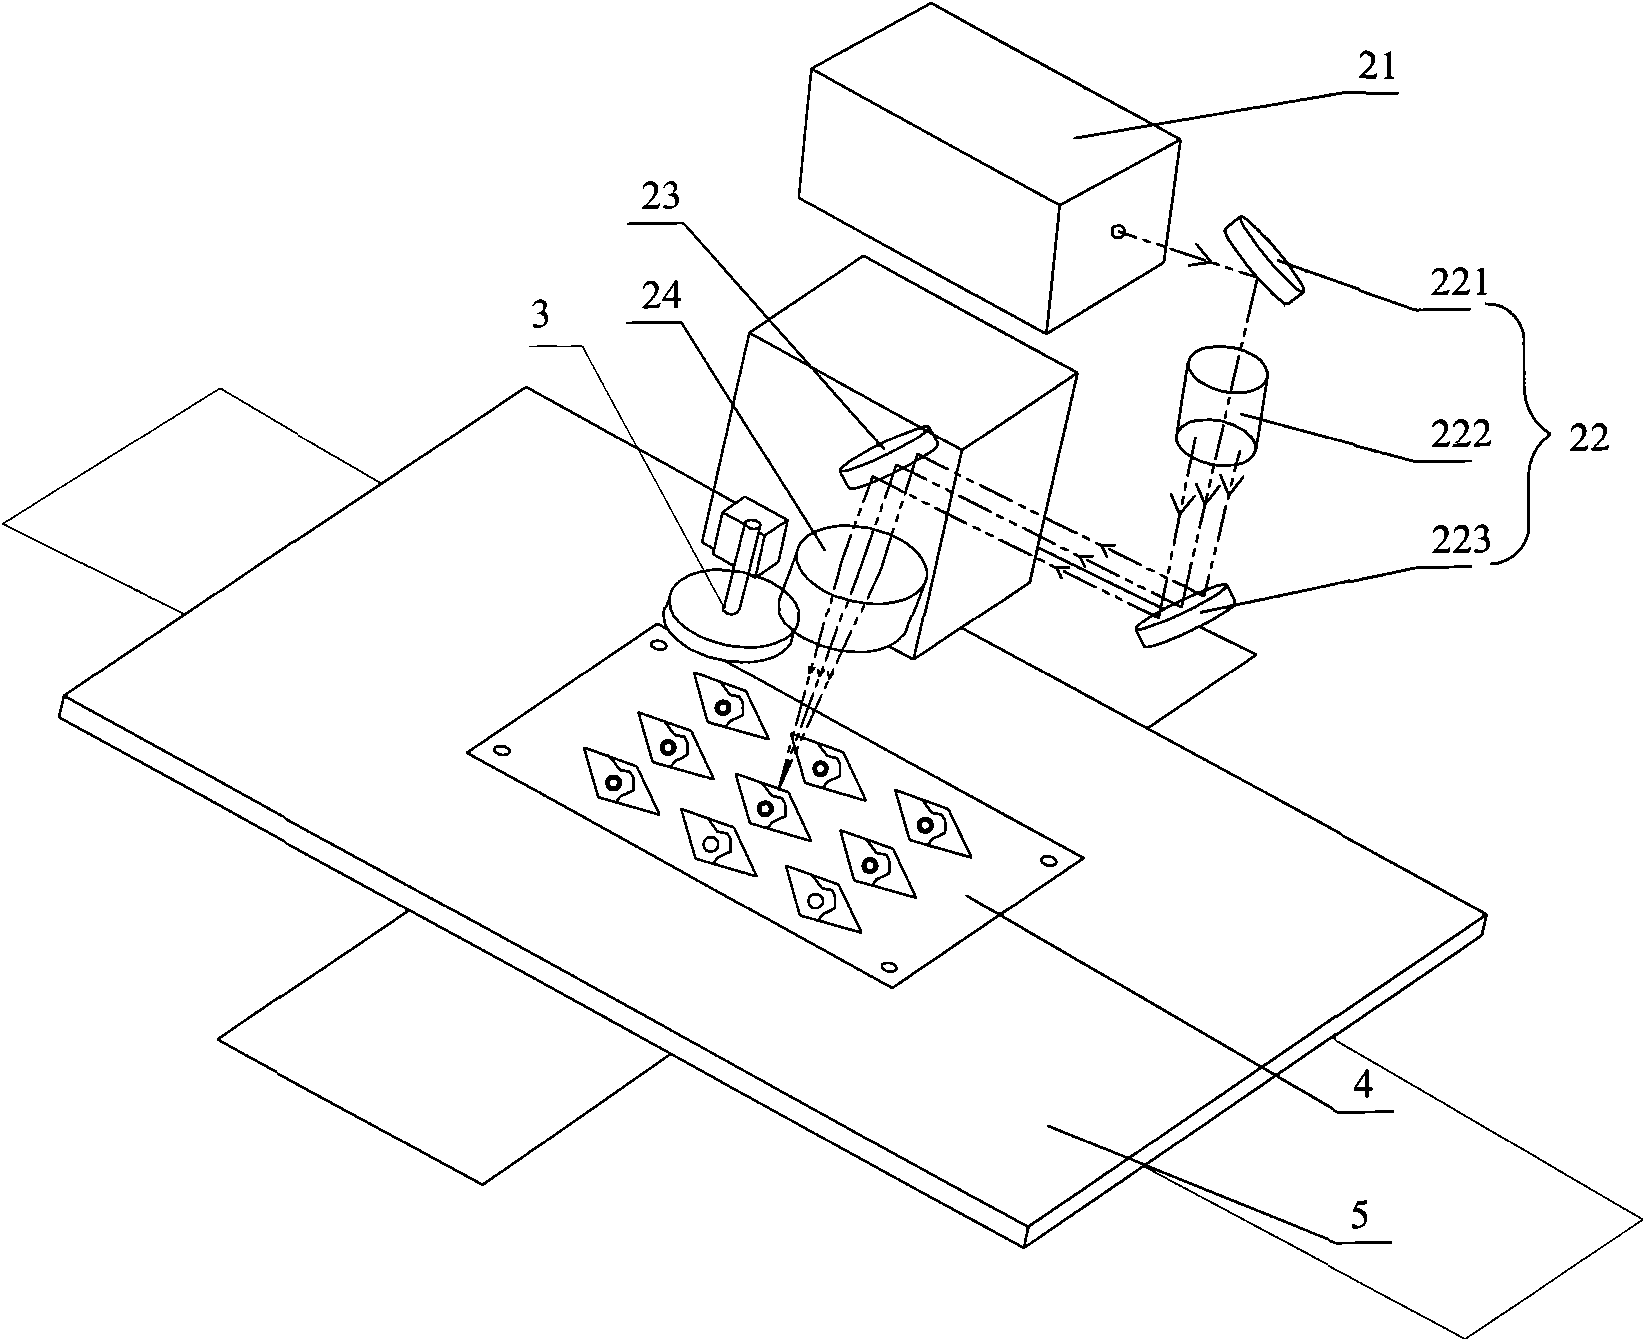 Laser cutting forming machine and method for uncapping soft and rigid combination board